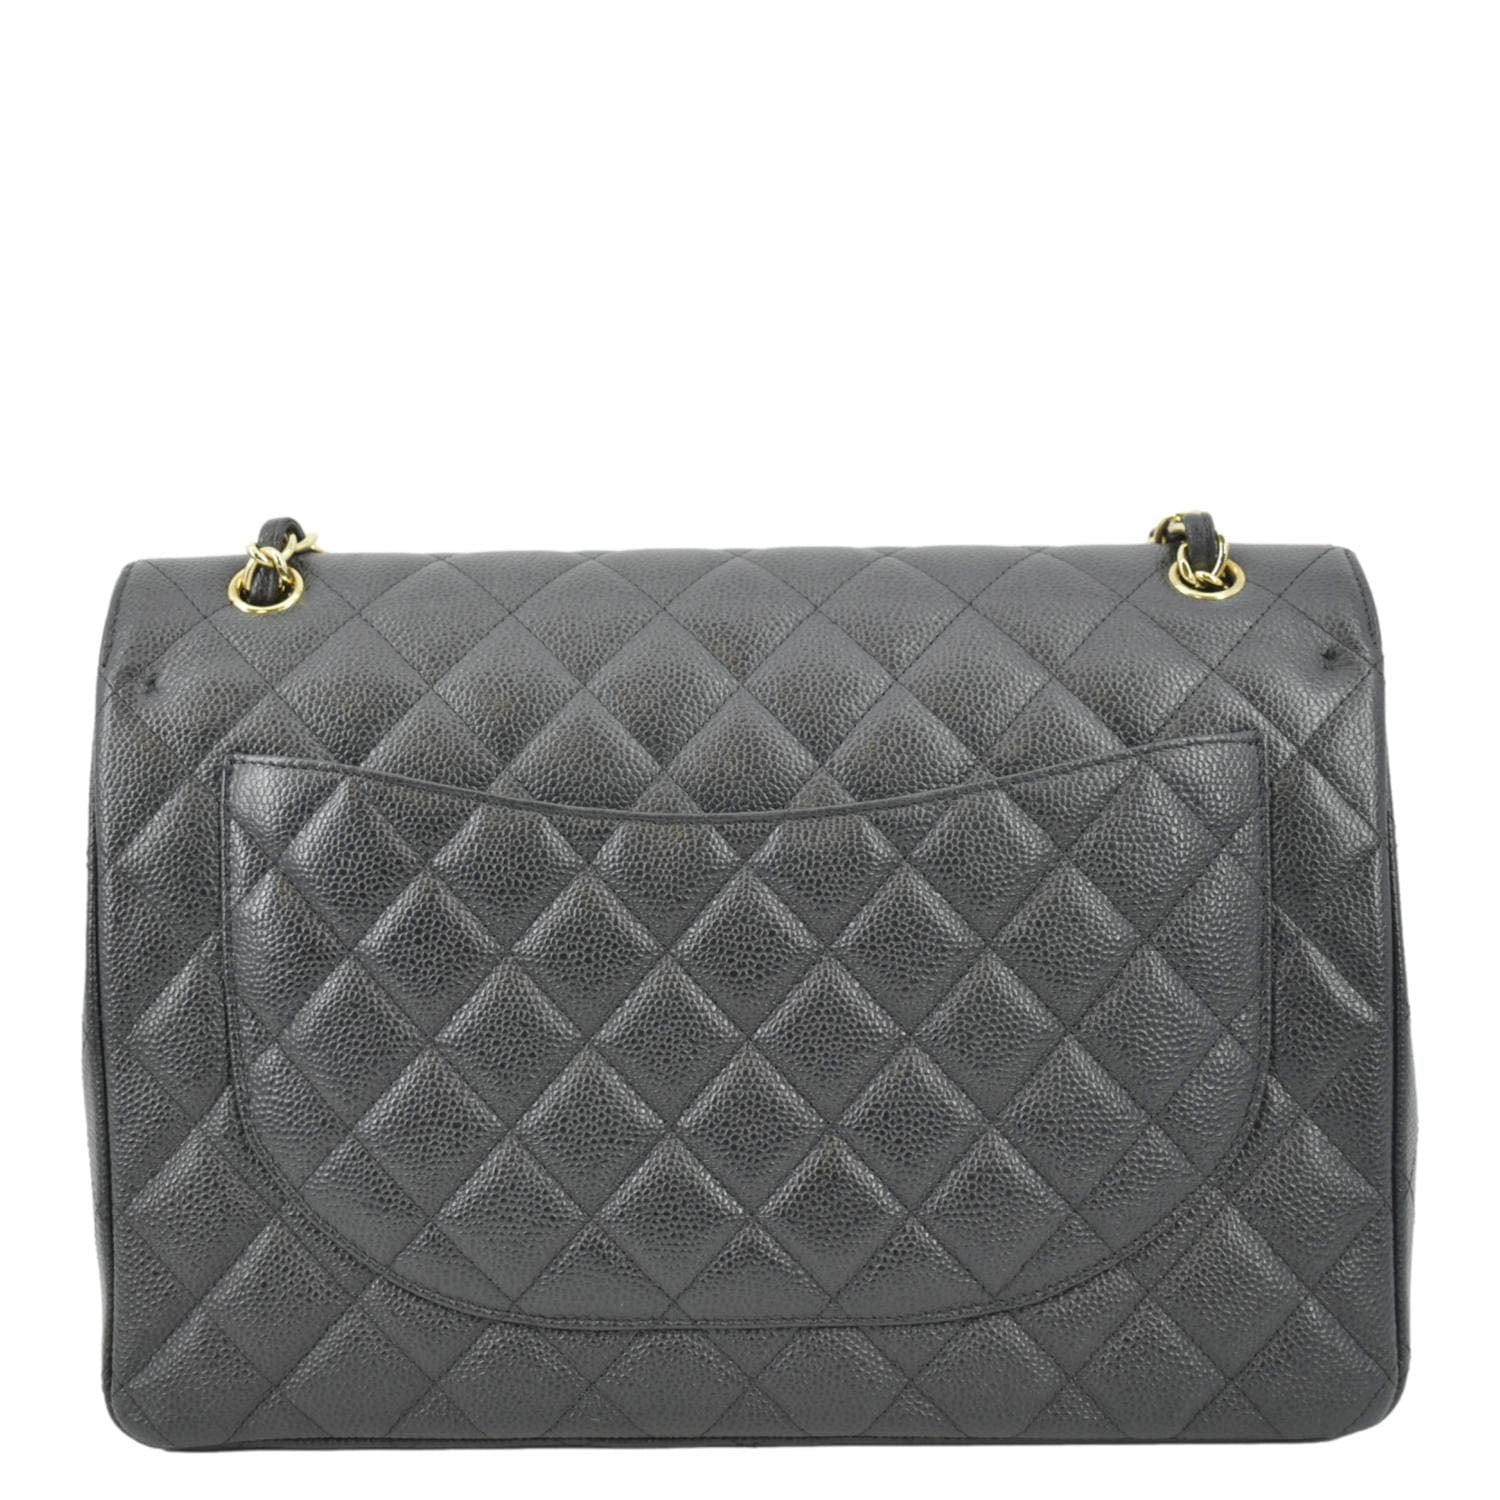 ✖️PENDING✖️ Chanel Classic Quilted Jumbo Double Flap Black